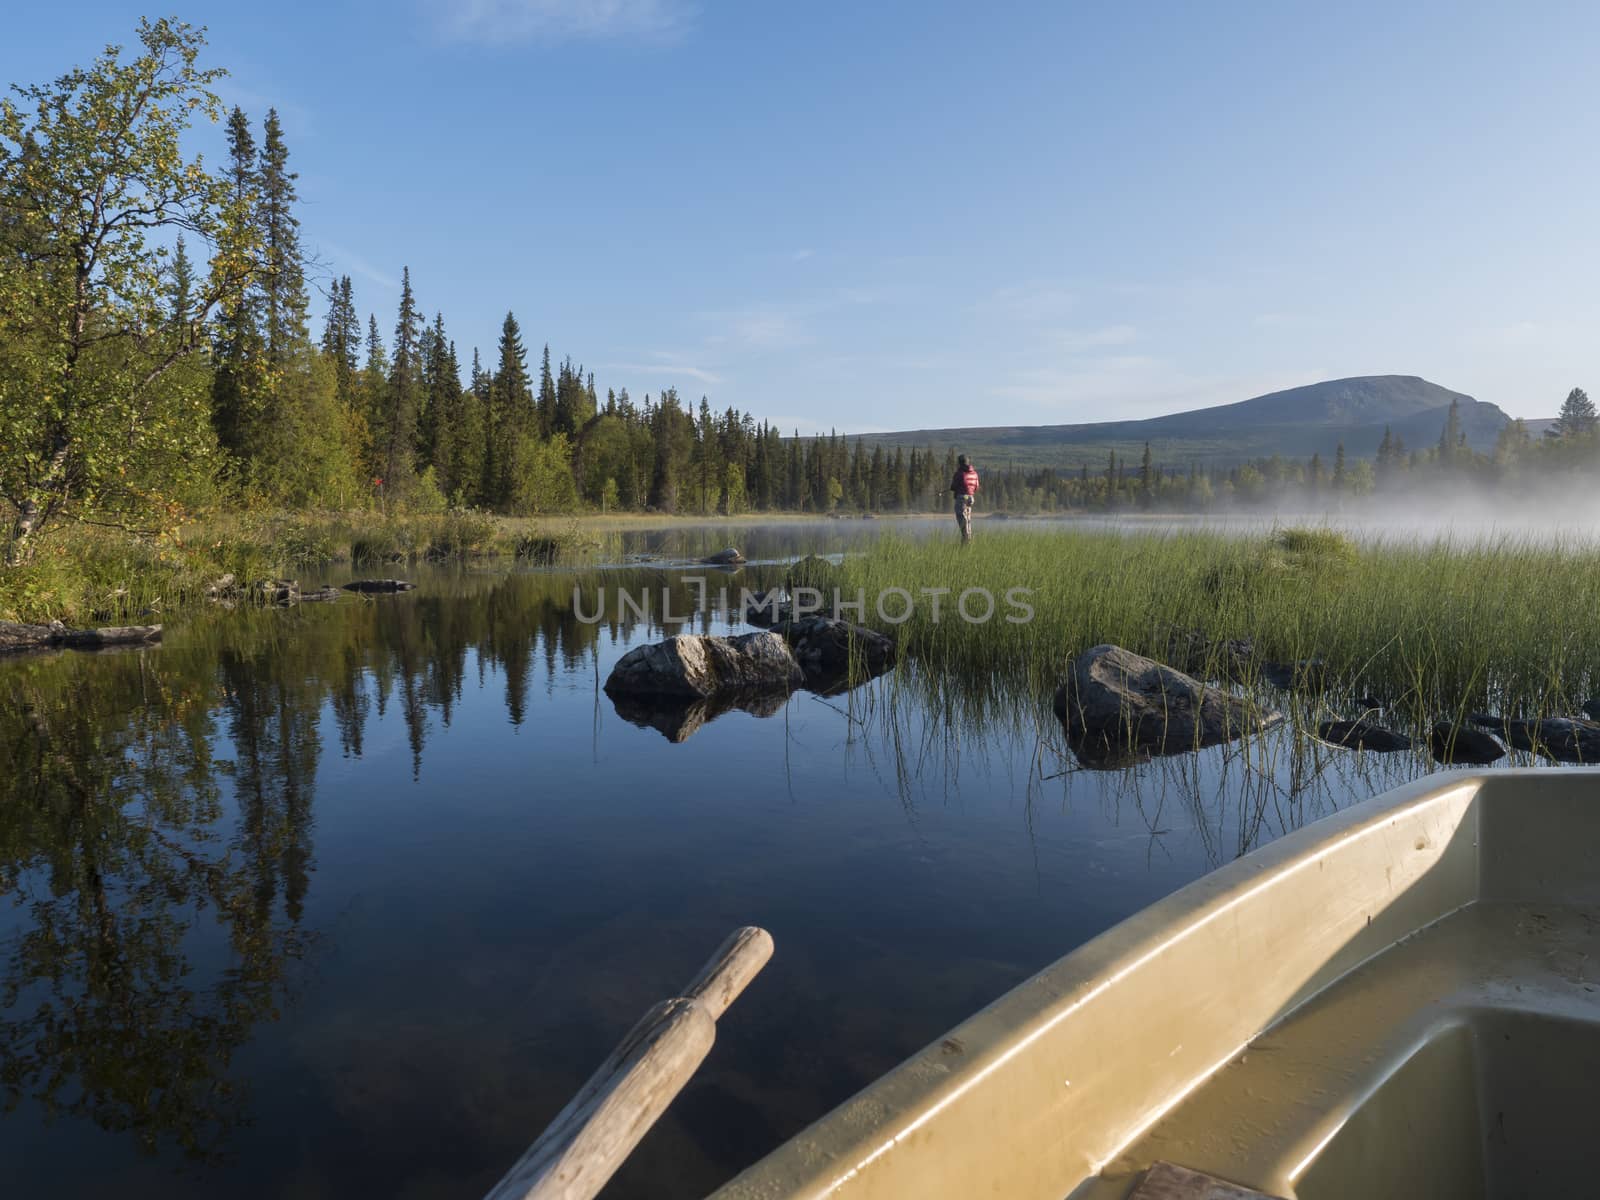 View from rowing boat on Fisherman man at lake Sjabatjakjaure in Beautiful sunny morning haze mist in Sweden Lapland nature. Mountains, birch trees, spruce forest. Blu sky background by Henkeova